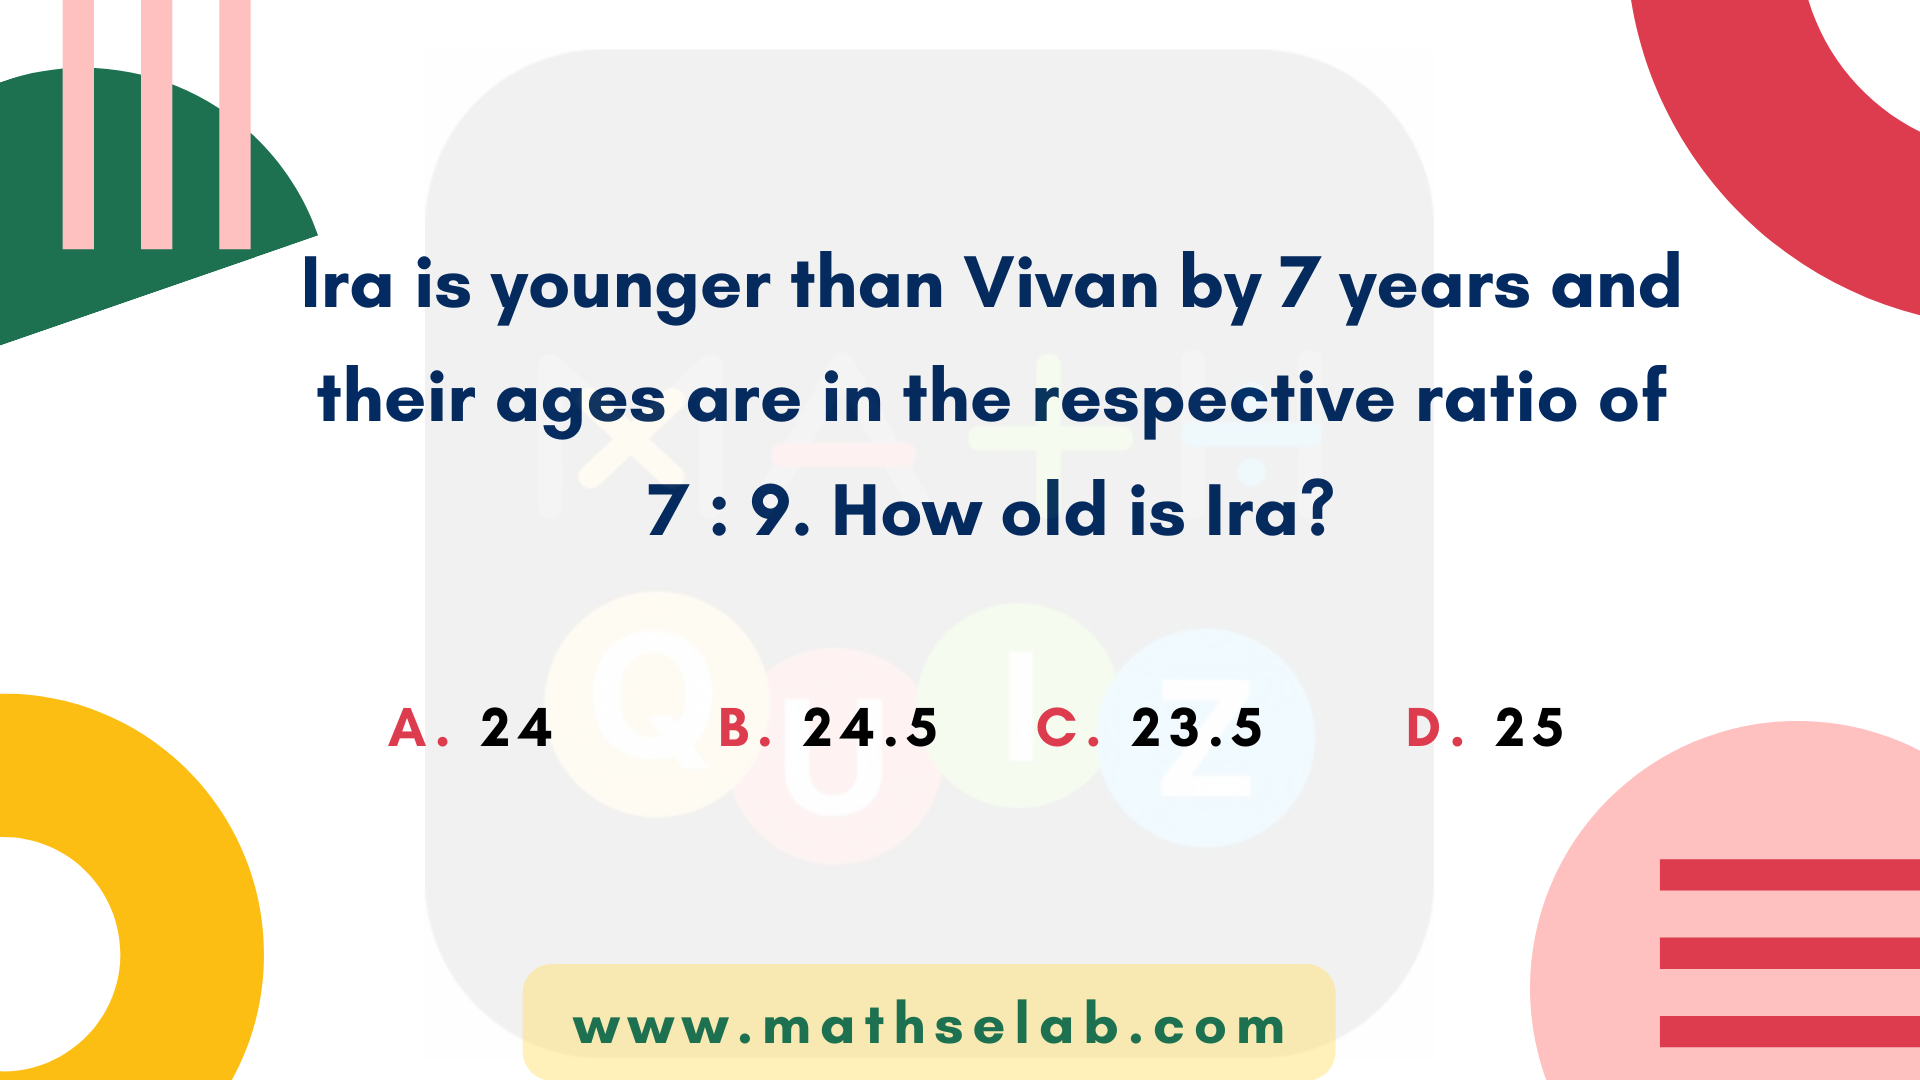 Ira is younger than Vivan by 7 years and their ages are in the respective ratio of 7 9. How old is Ira - www.mathselab.com